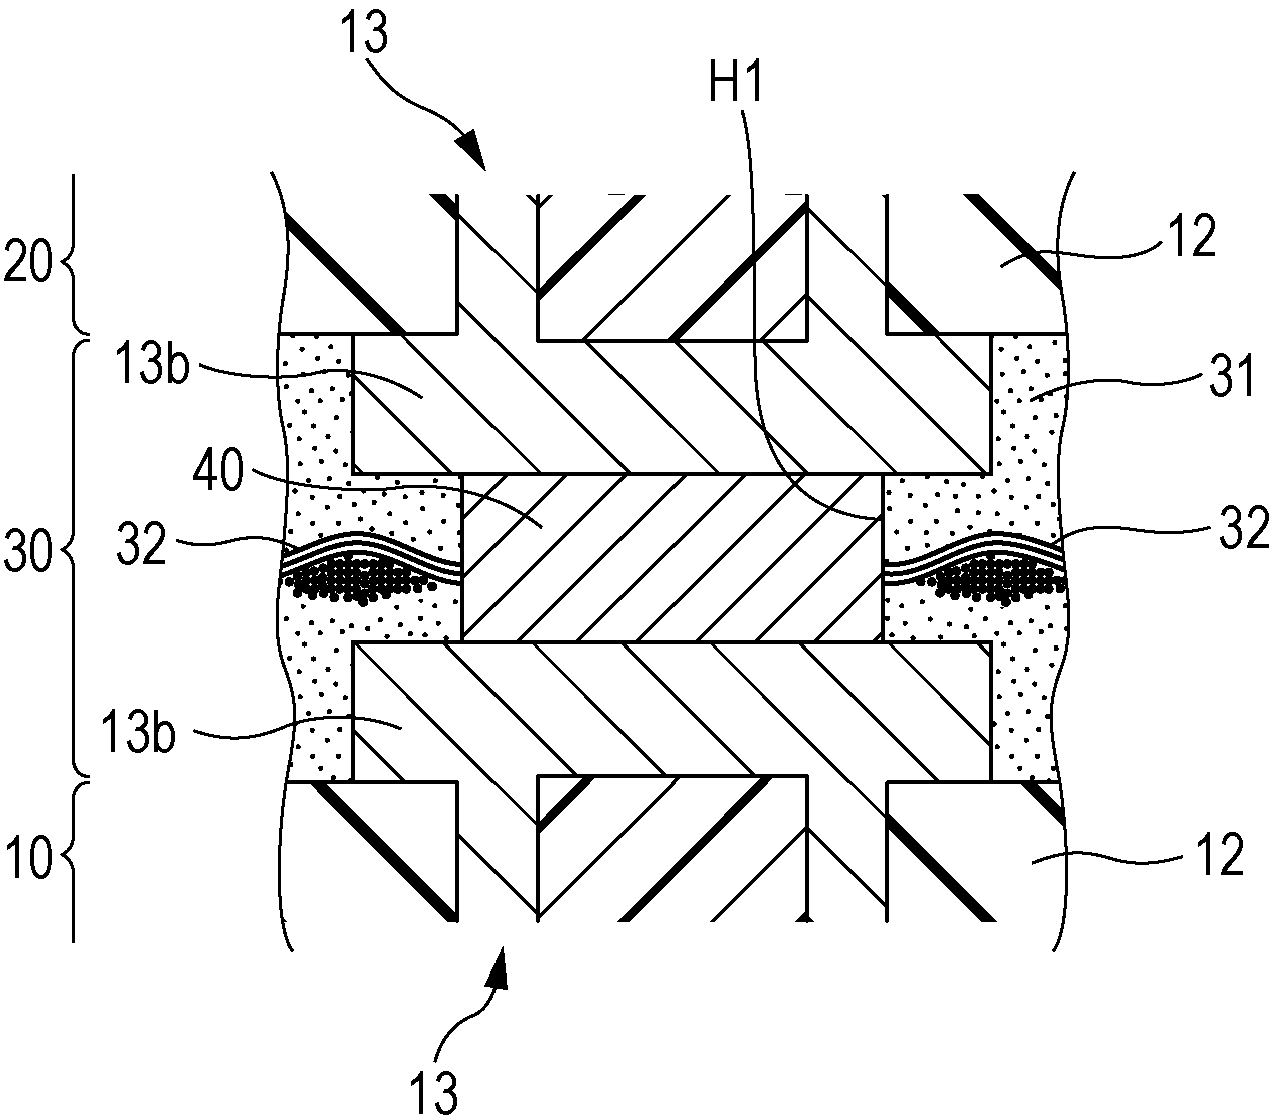 A method of manufacturing a multilayer circuit board and the multilayer circuit board